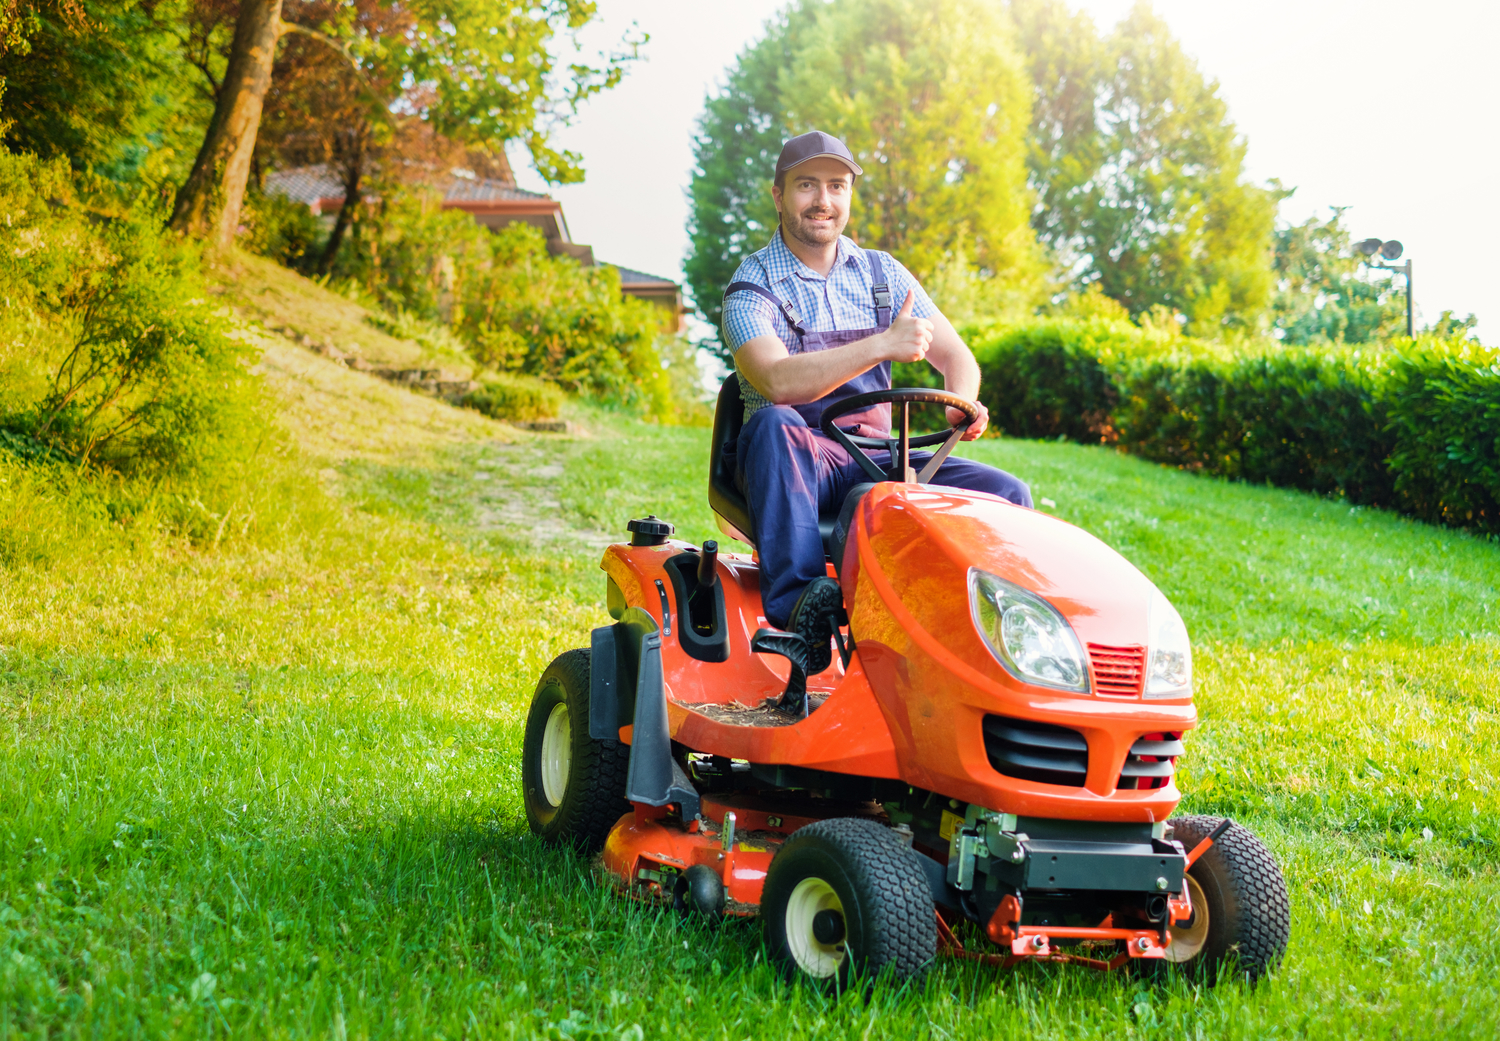 faqs-for-small-riding-lawn-mowers-answersguide